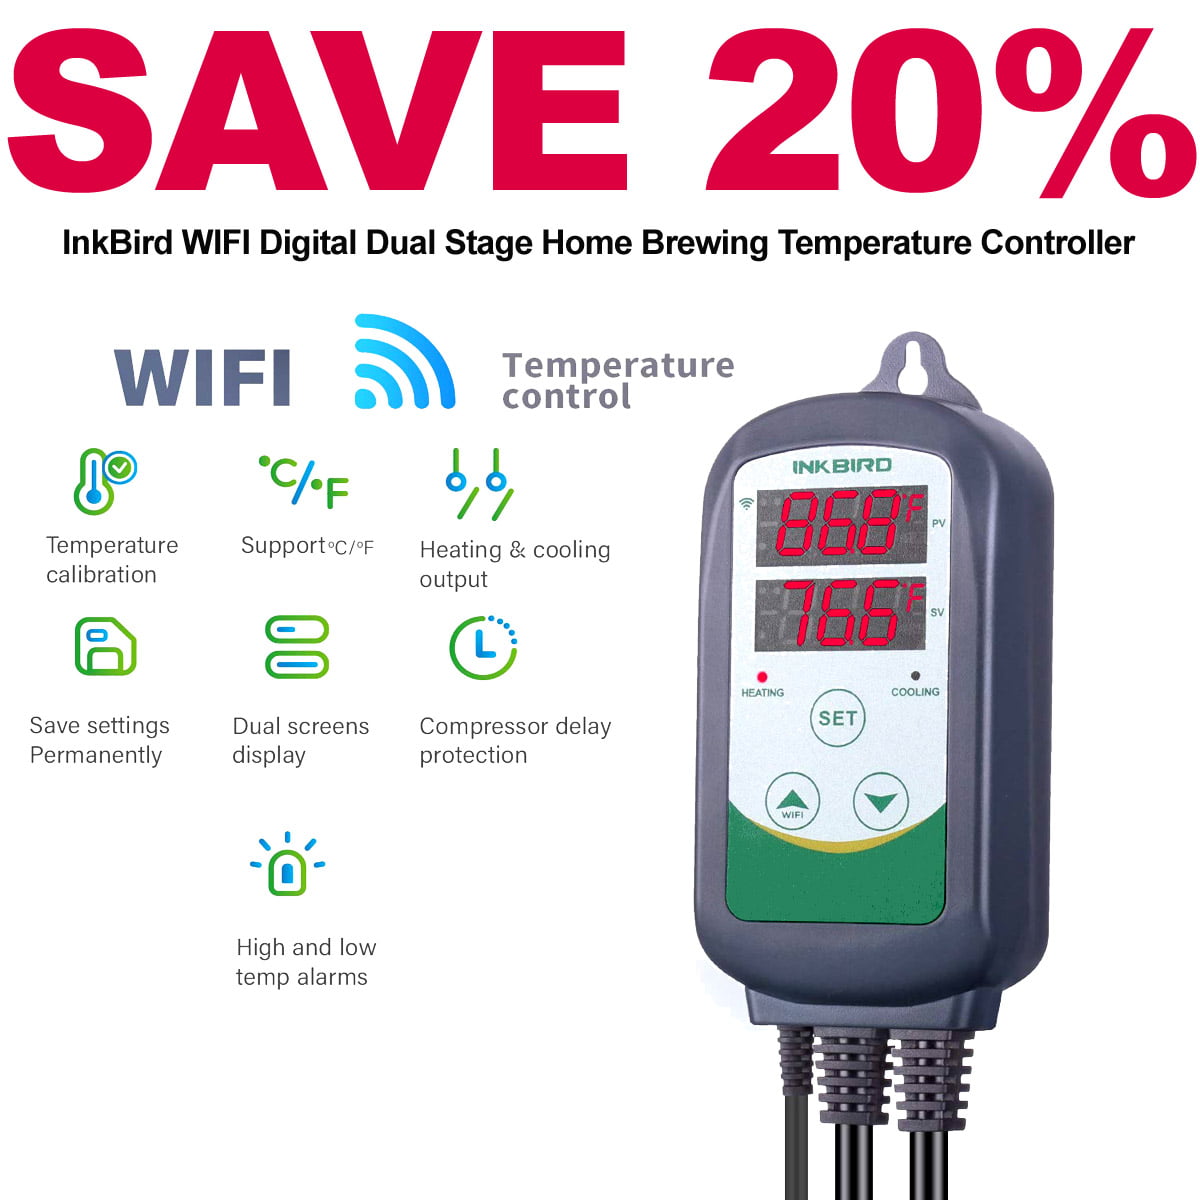 The New InkBird WIFI Dual Stage Temperature Controller